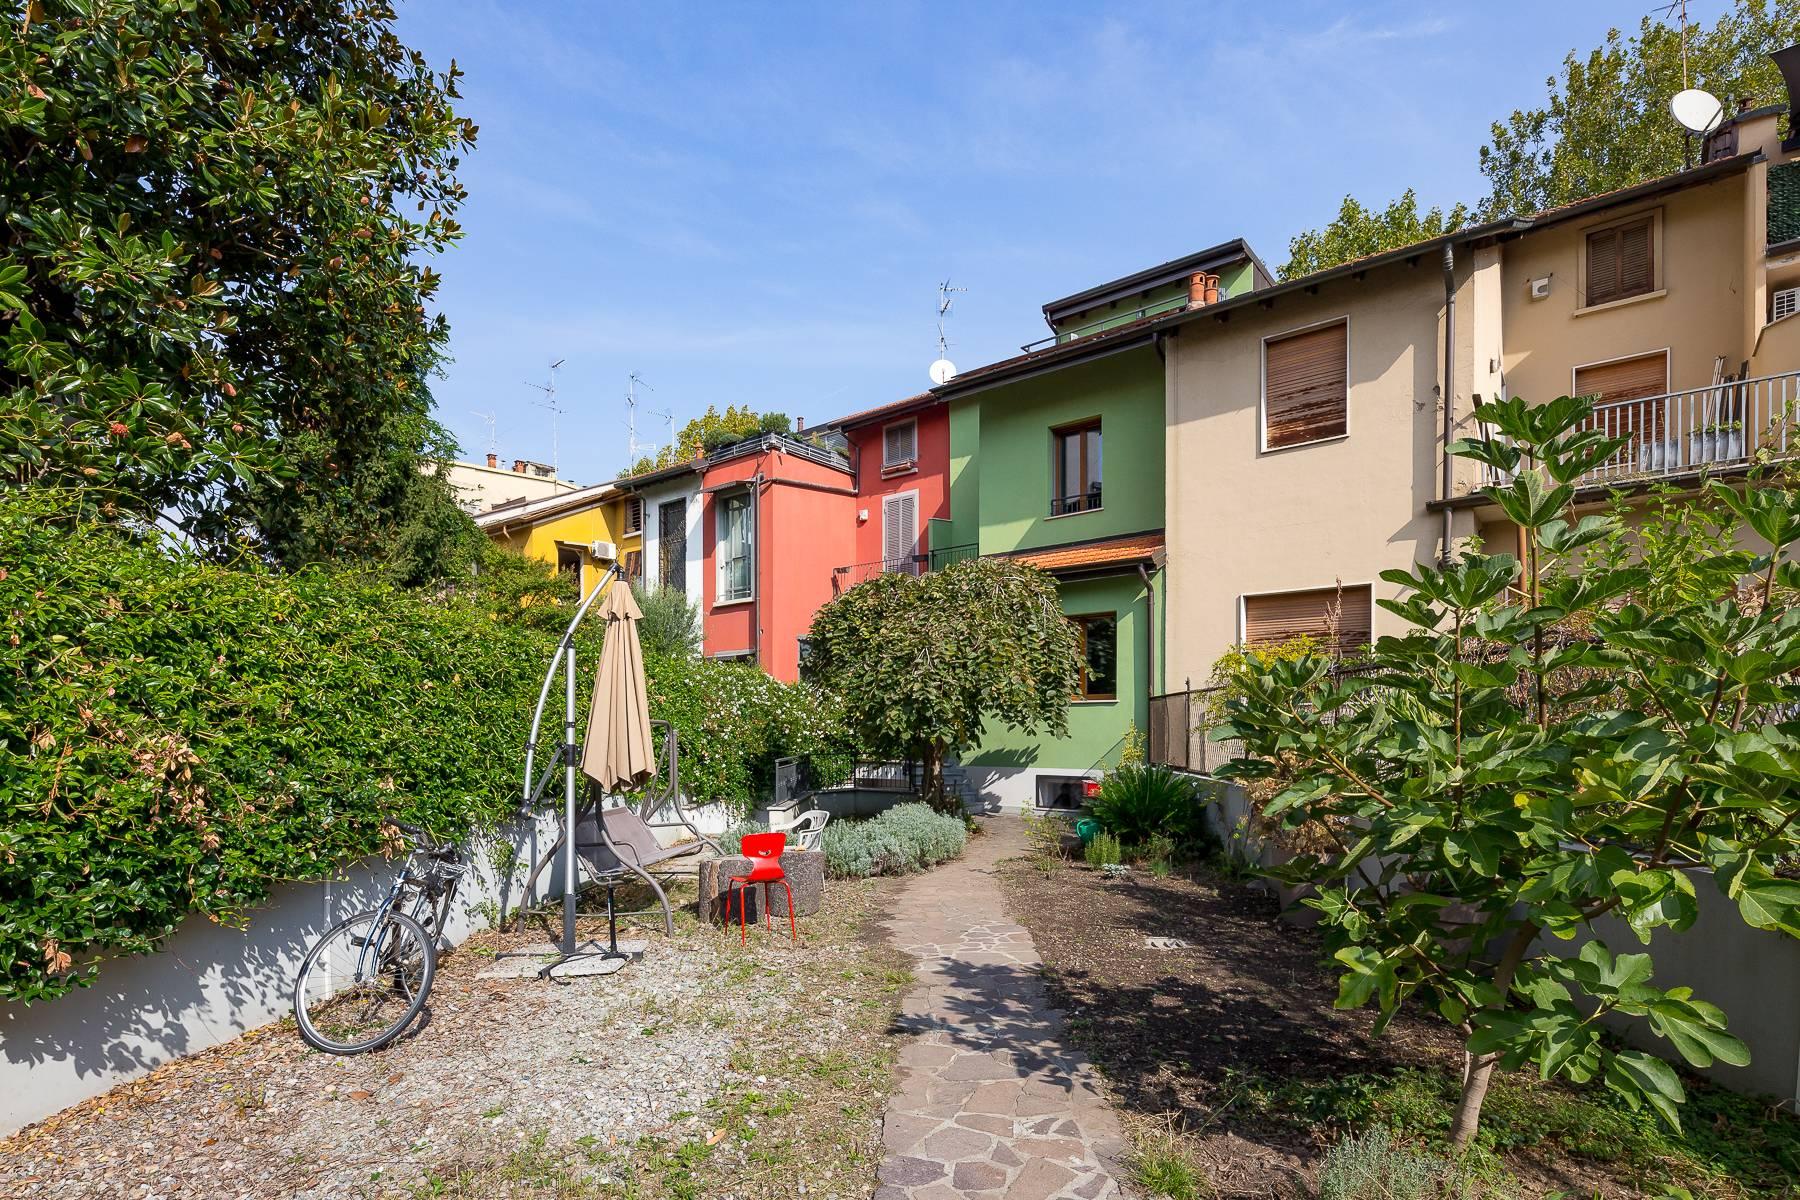 Detached house in Lancetti area - 20